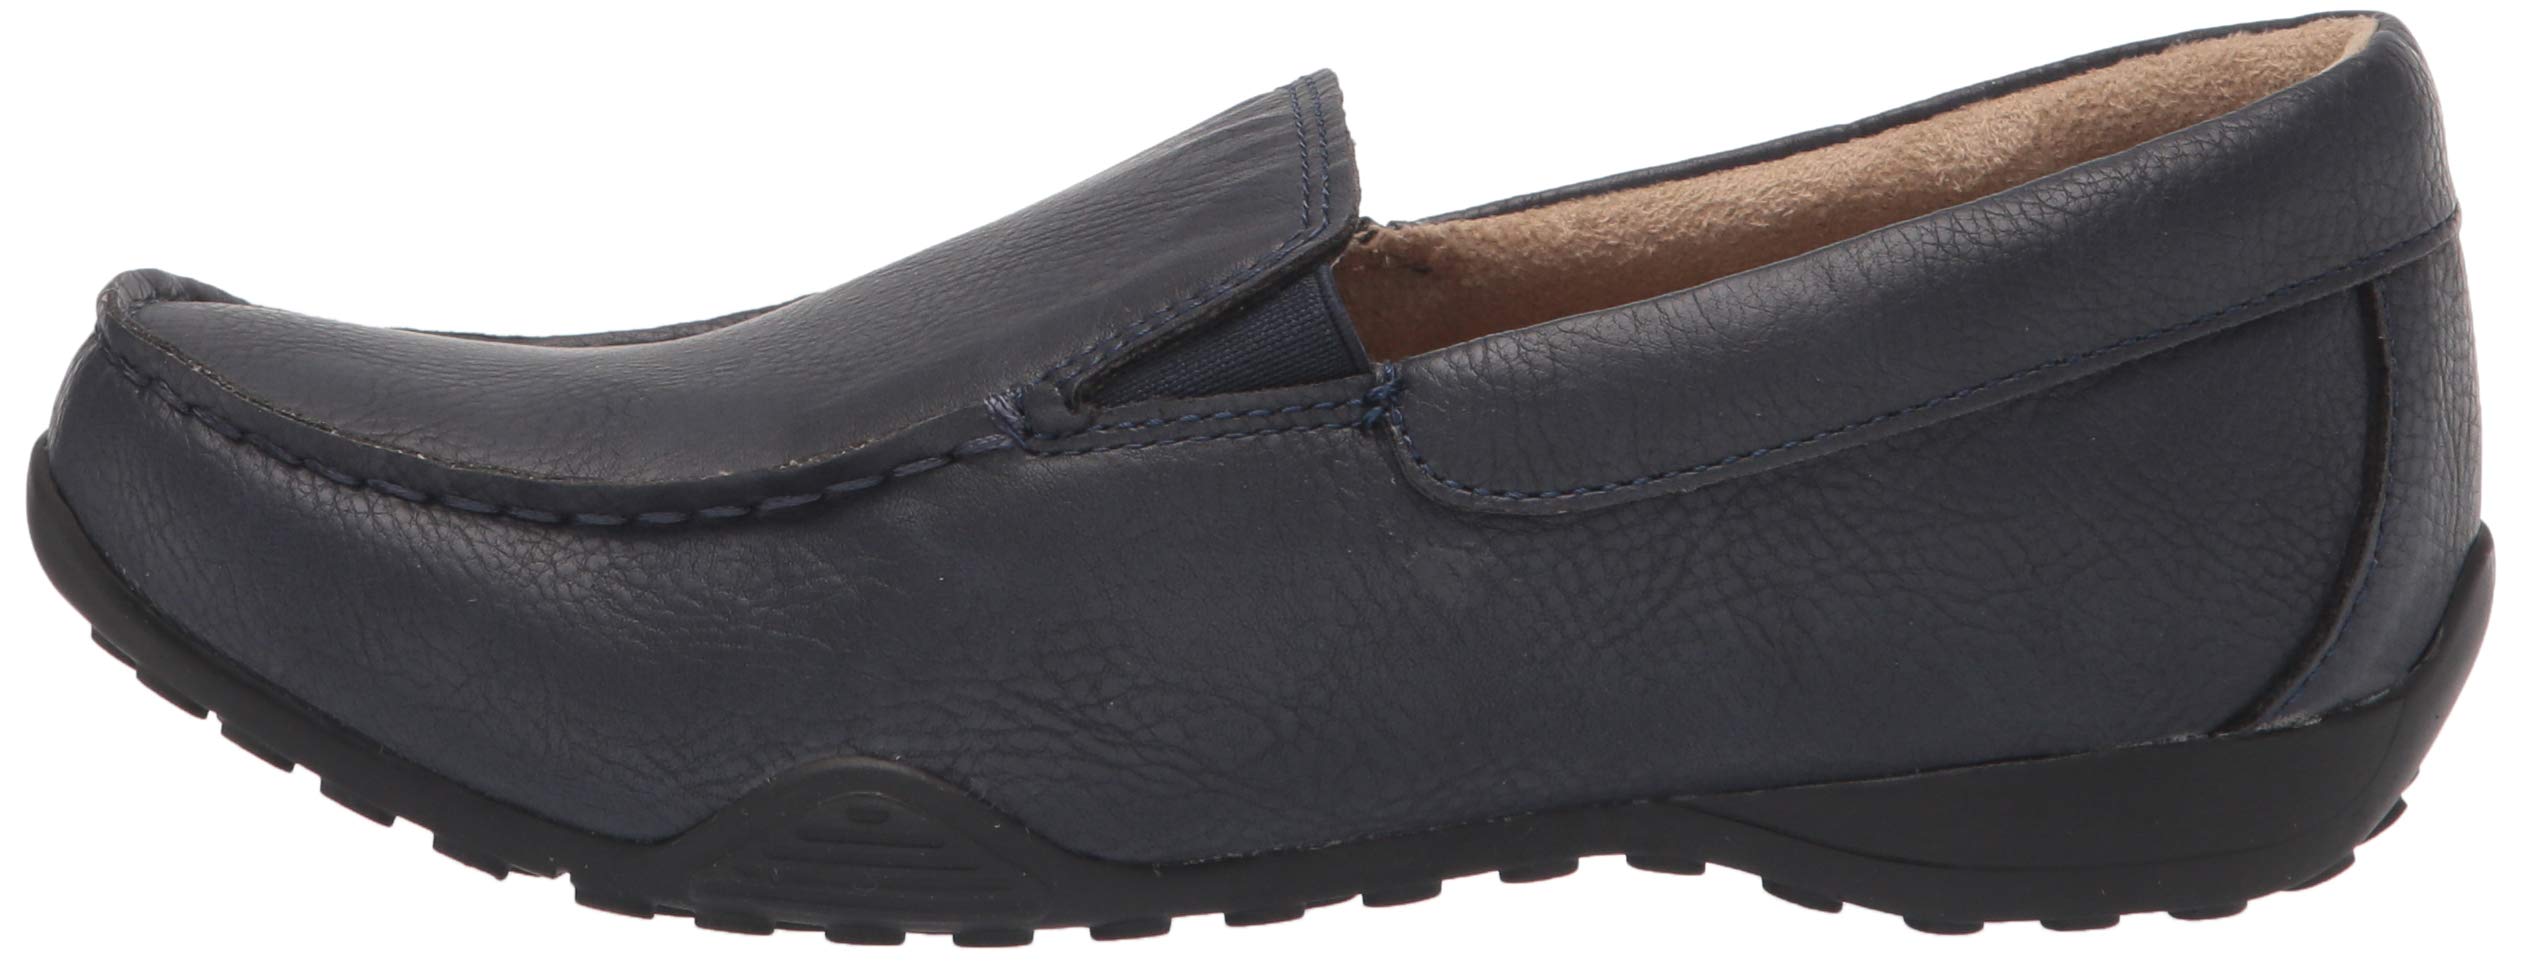 The Children's Place Boy's Slip on Loafer Shoes Ballet Flat